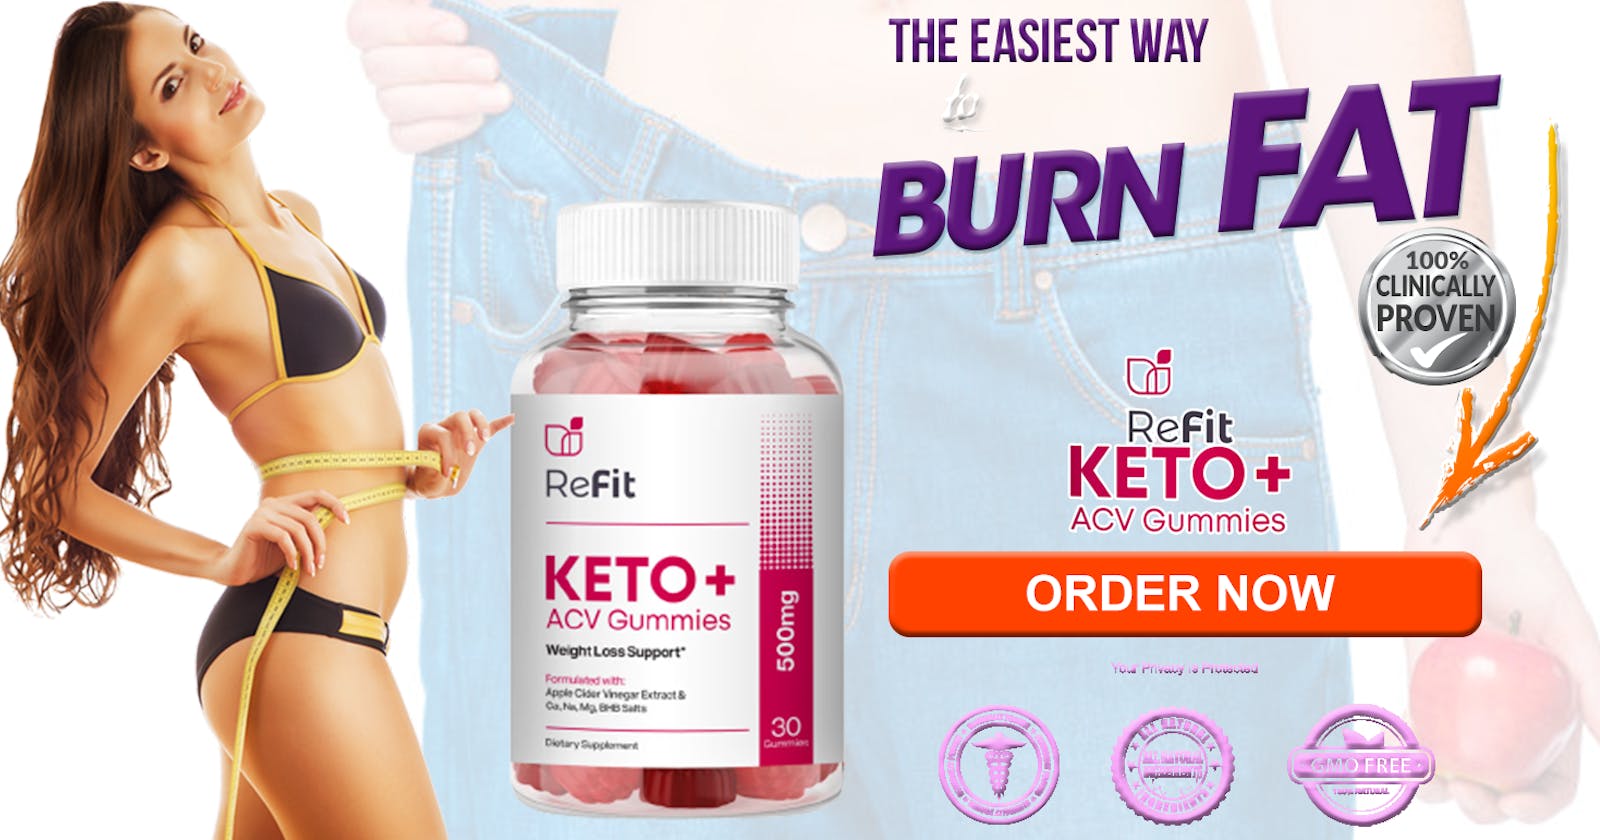 Refit Keto Gummies : Are They Safe For Lose Weight?